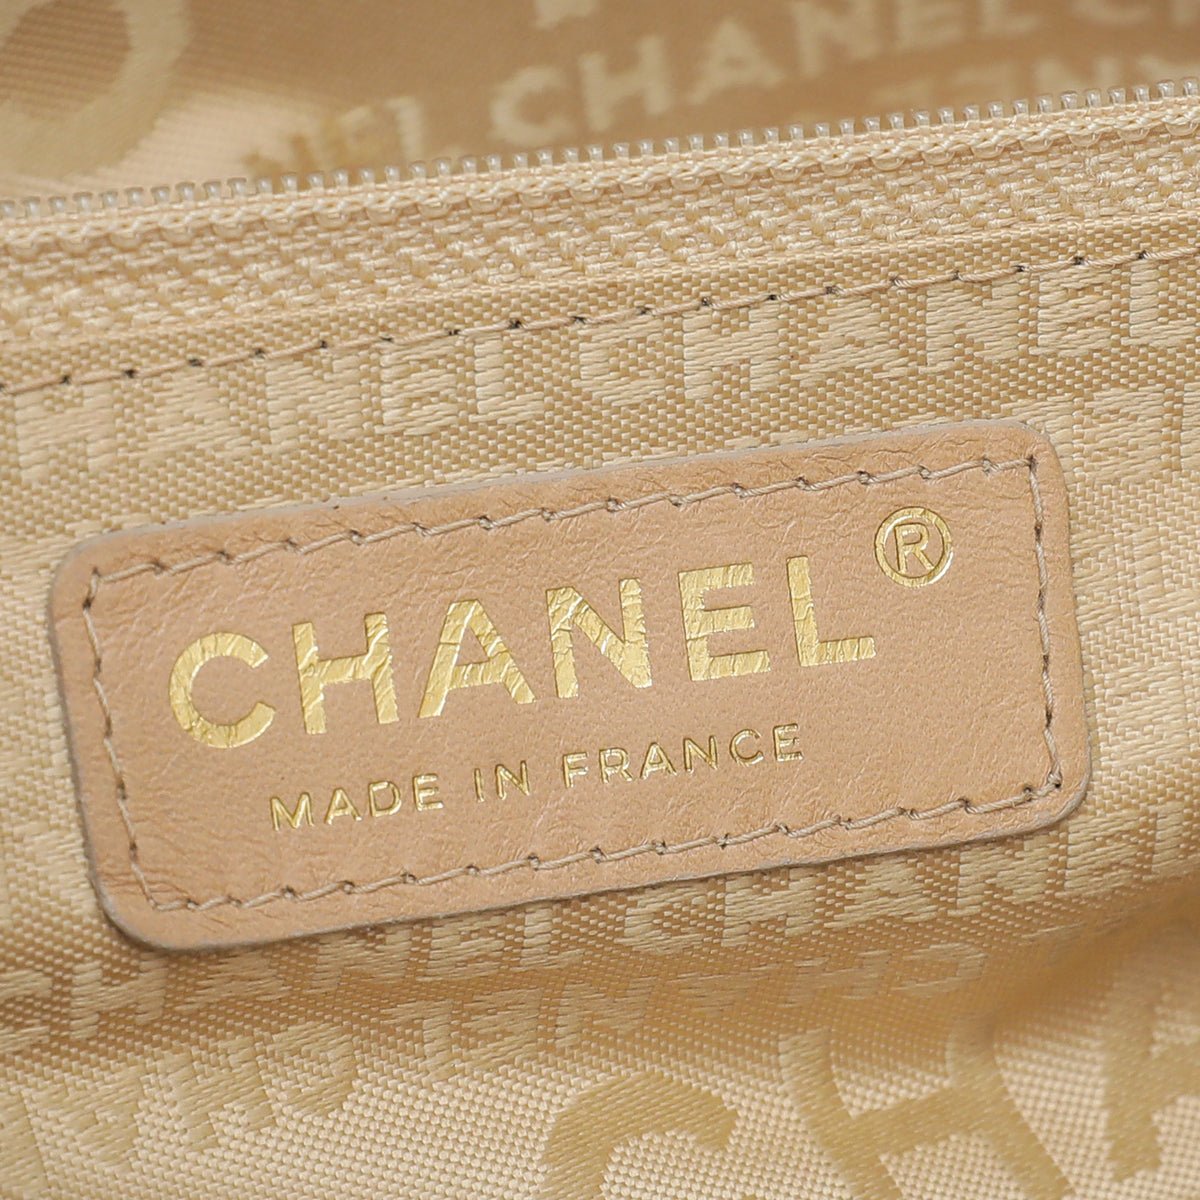 Chanel - Chanel Beige Front Flap Pocket Tote Bag | The Closet